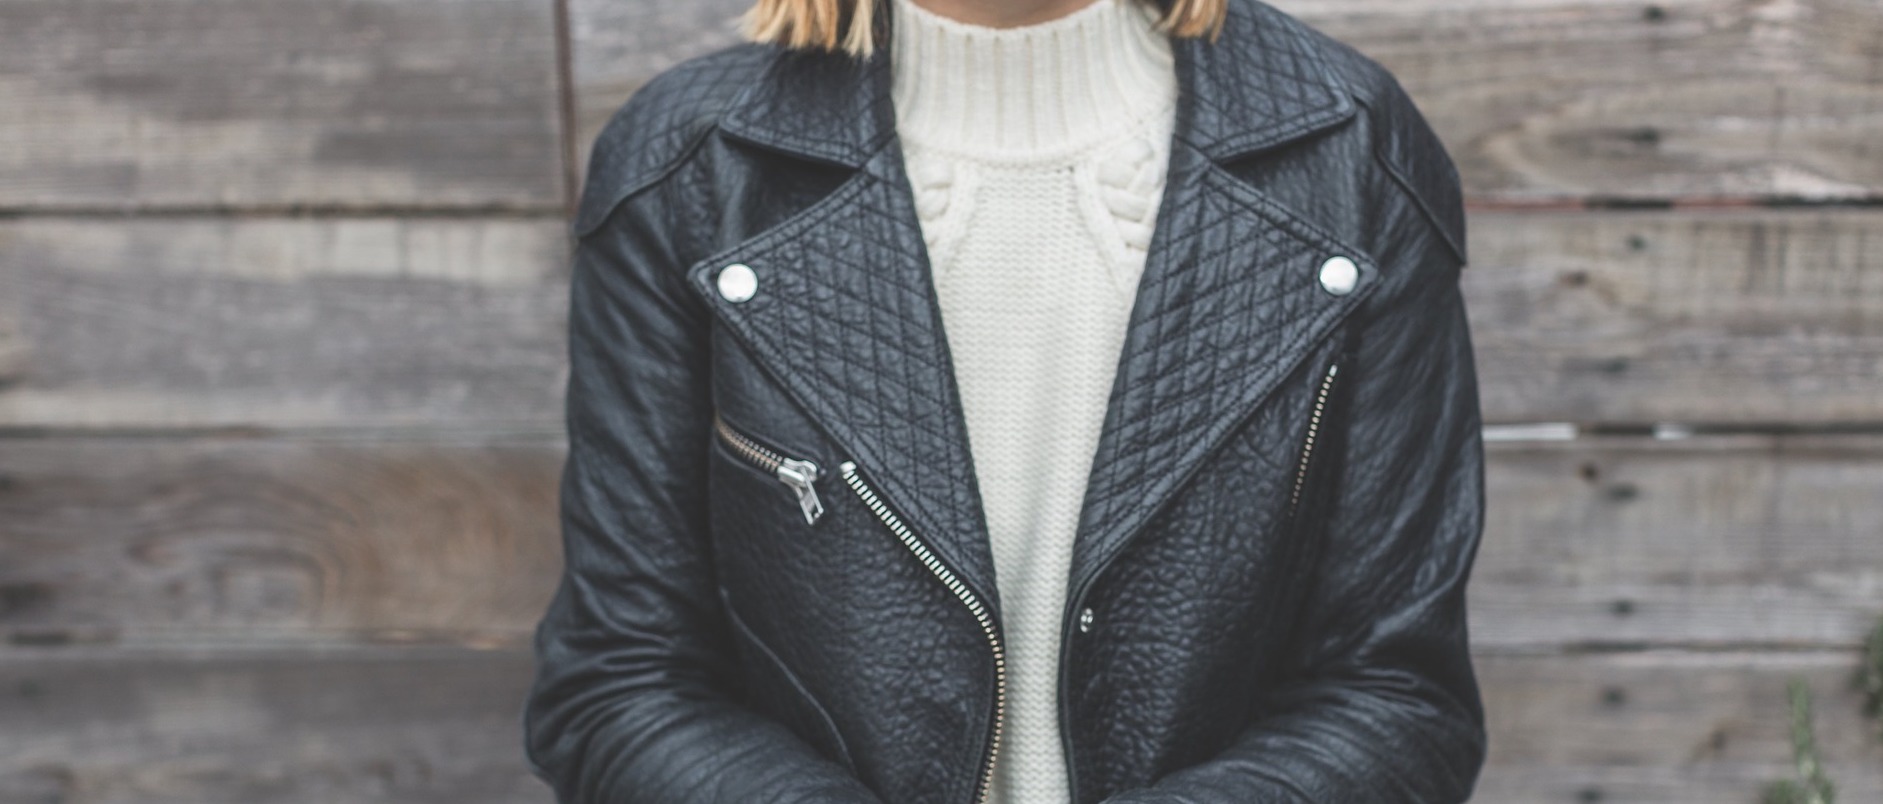 Improve your jacket’s longevity with leather care tips from style ...